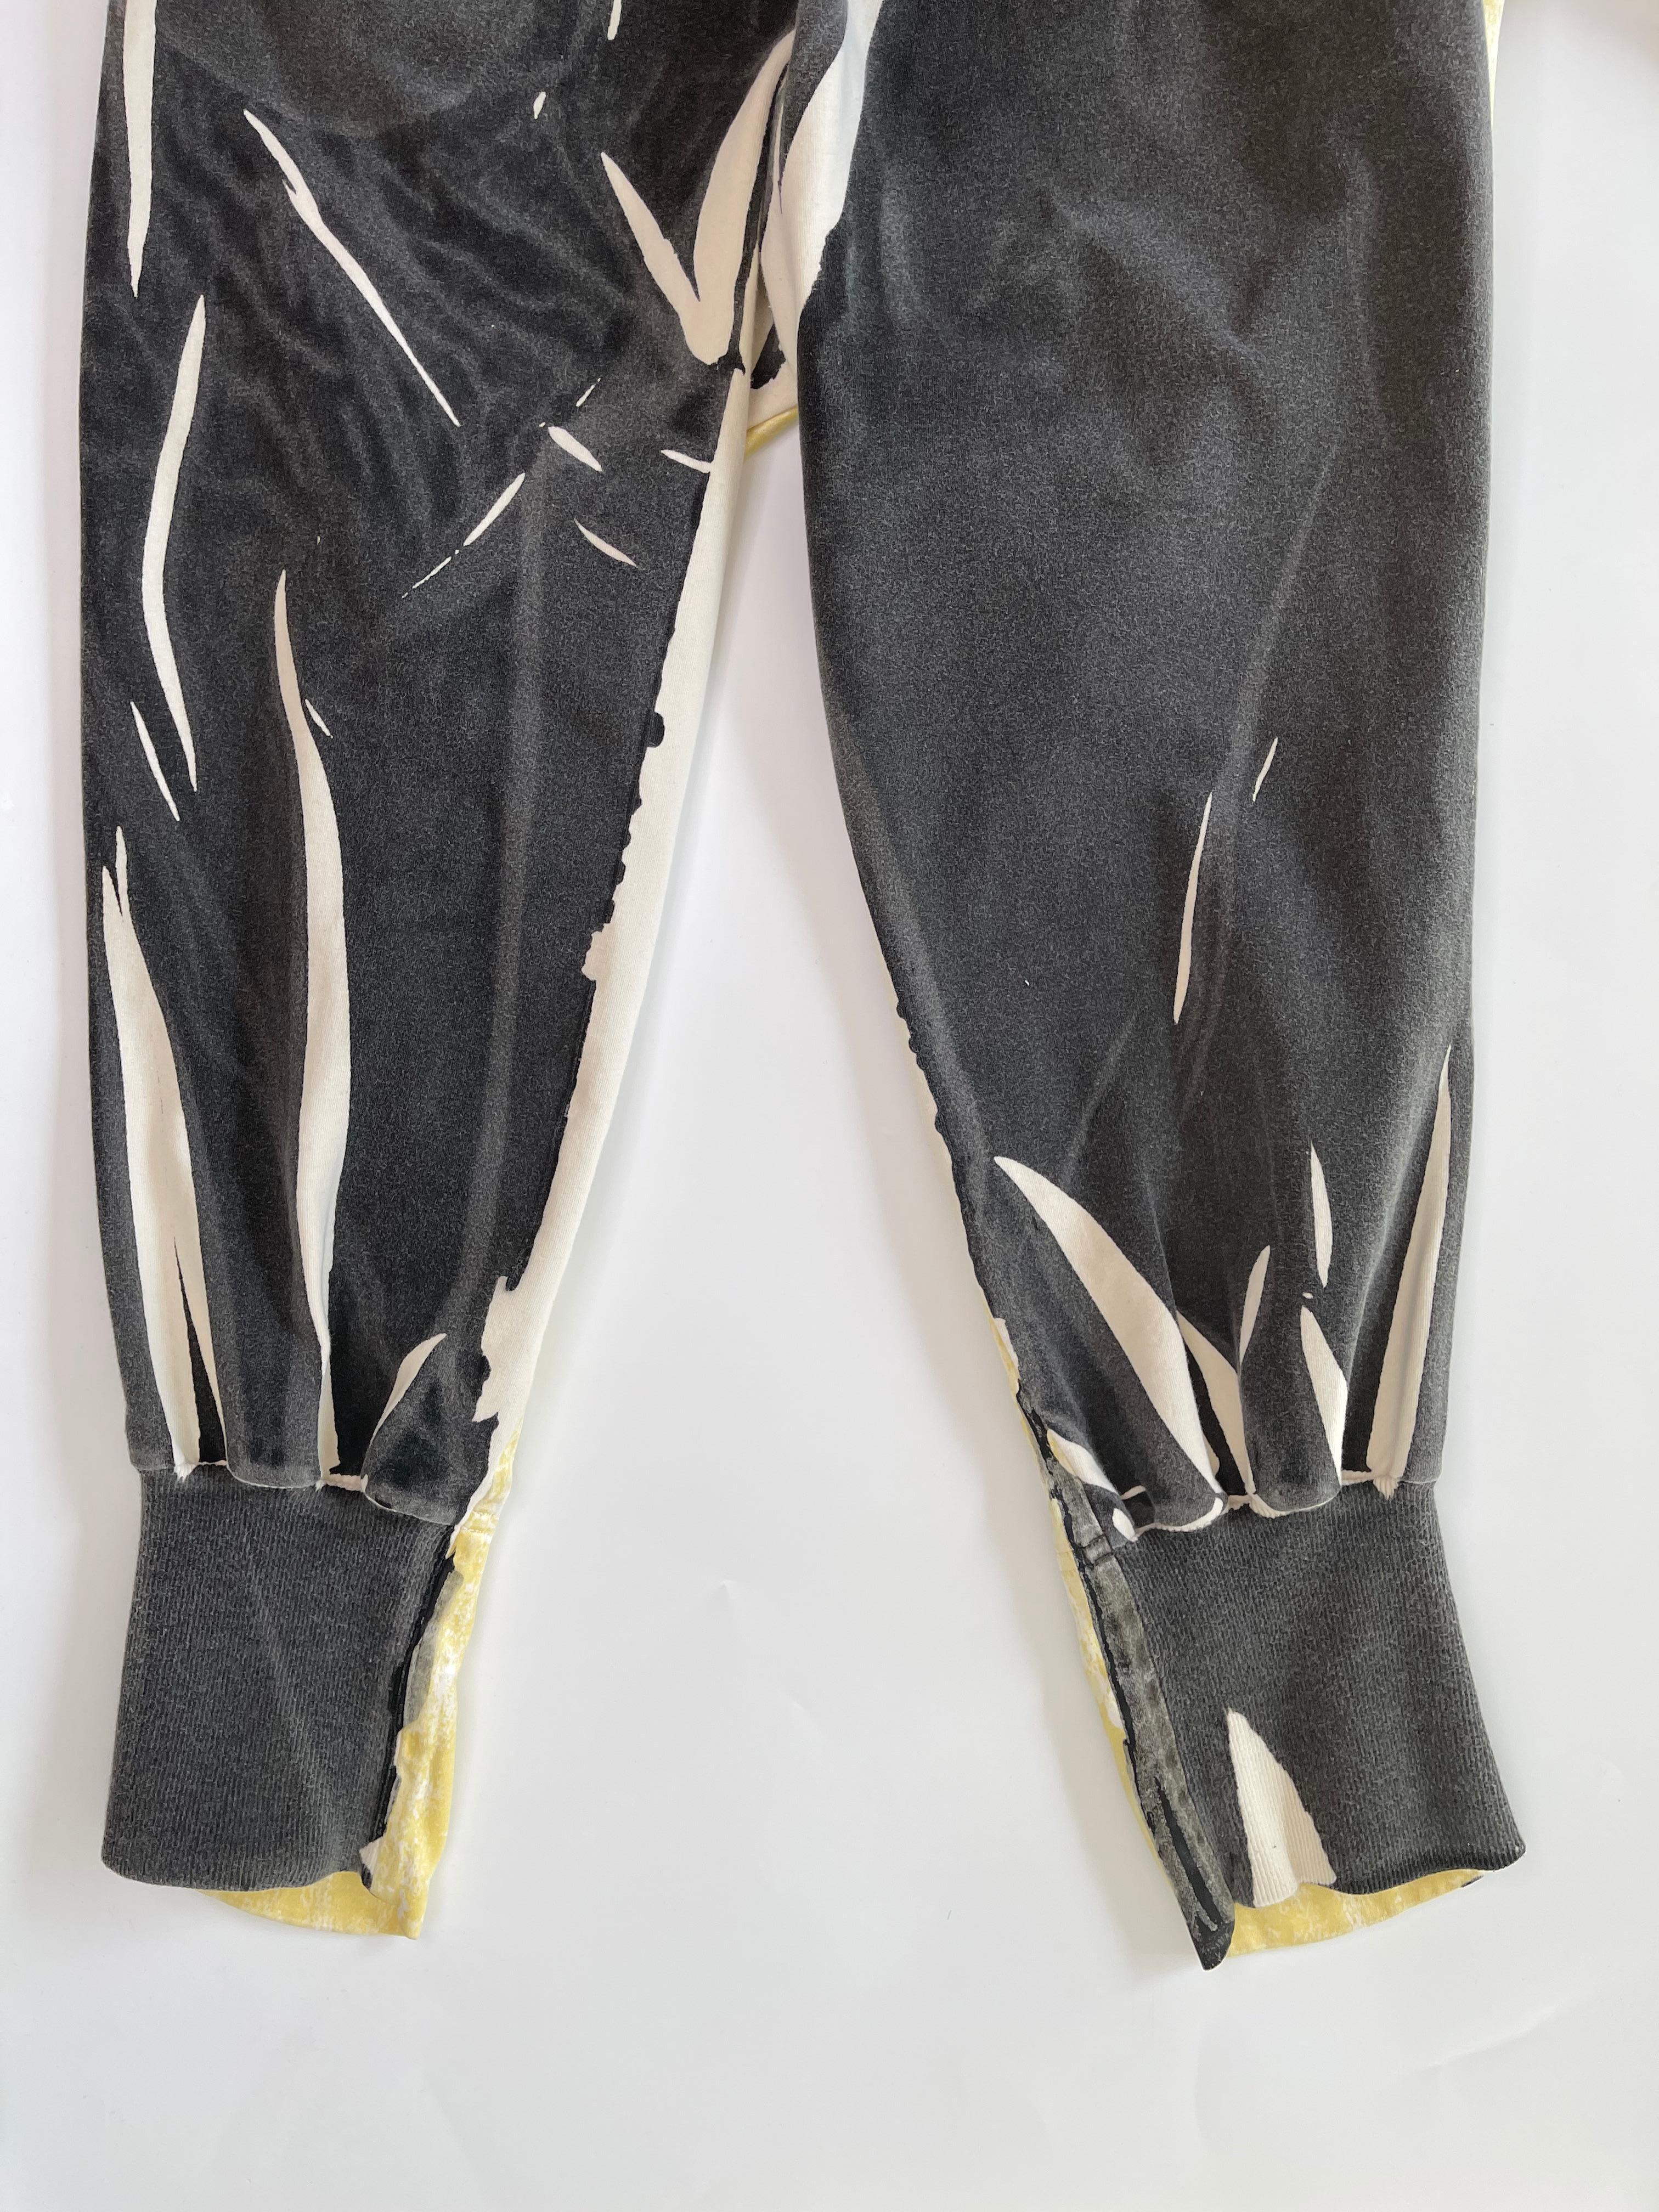 Vivienne Westwood Yellow Sweatpants In Good Condition For Sale In Montreal, Quebec